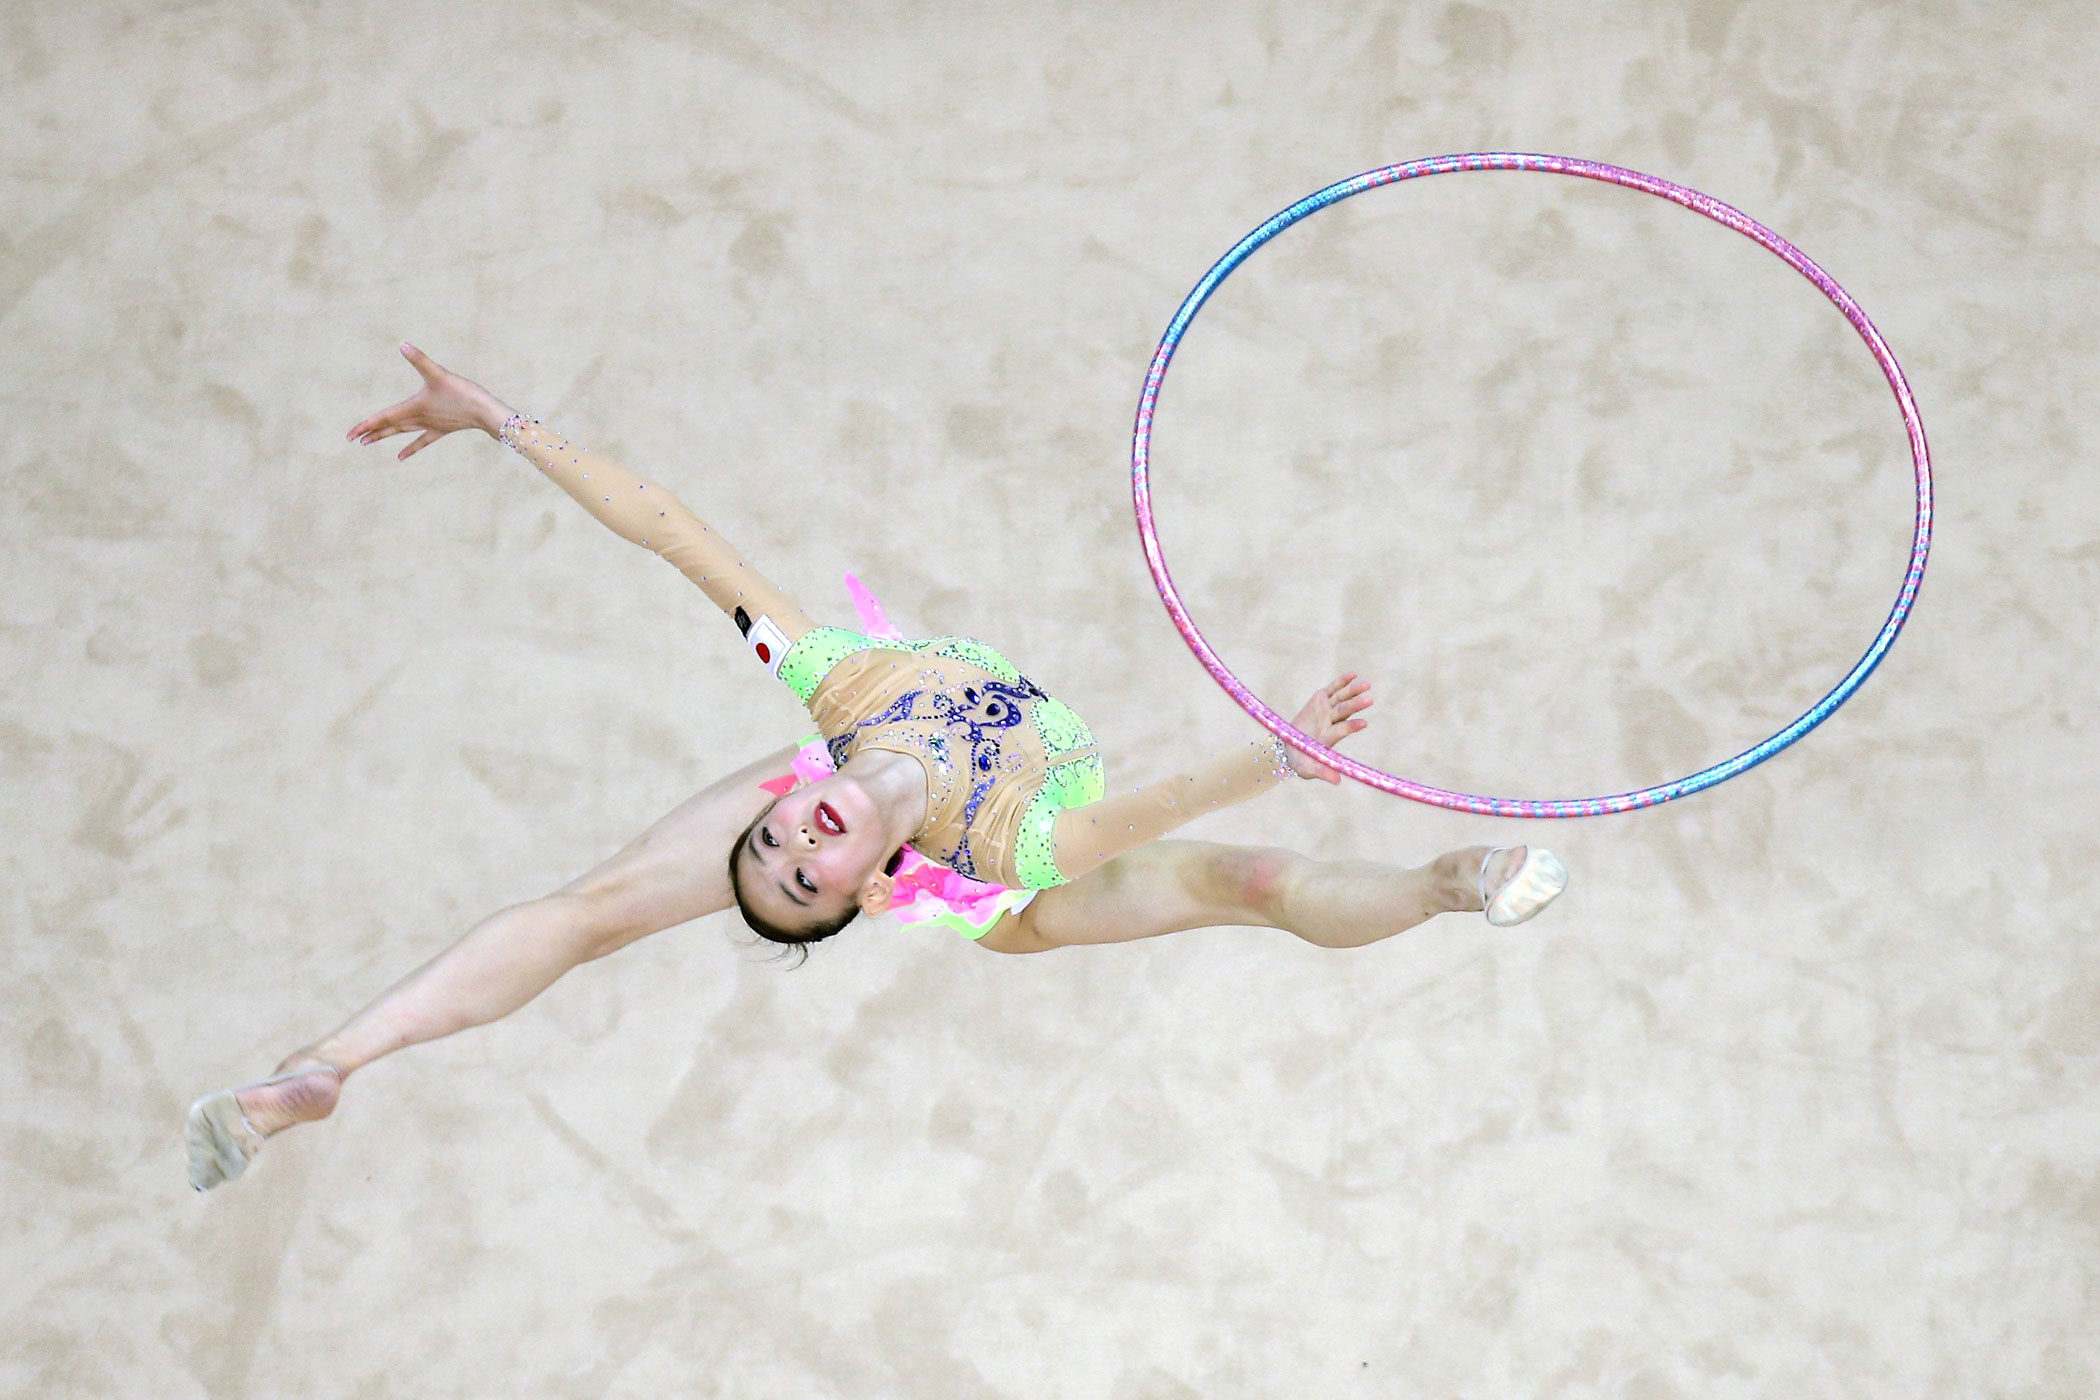 Takana Tatsuzawa of Japan competes in Rhythmic Gymnastics Individual All-Around Qualification on day ten of the Nanjing 2014 Summer Youth Olympic Games at Nanjing OSC Gymnasium on Aug. 26, 2014 in Nanjing.